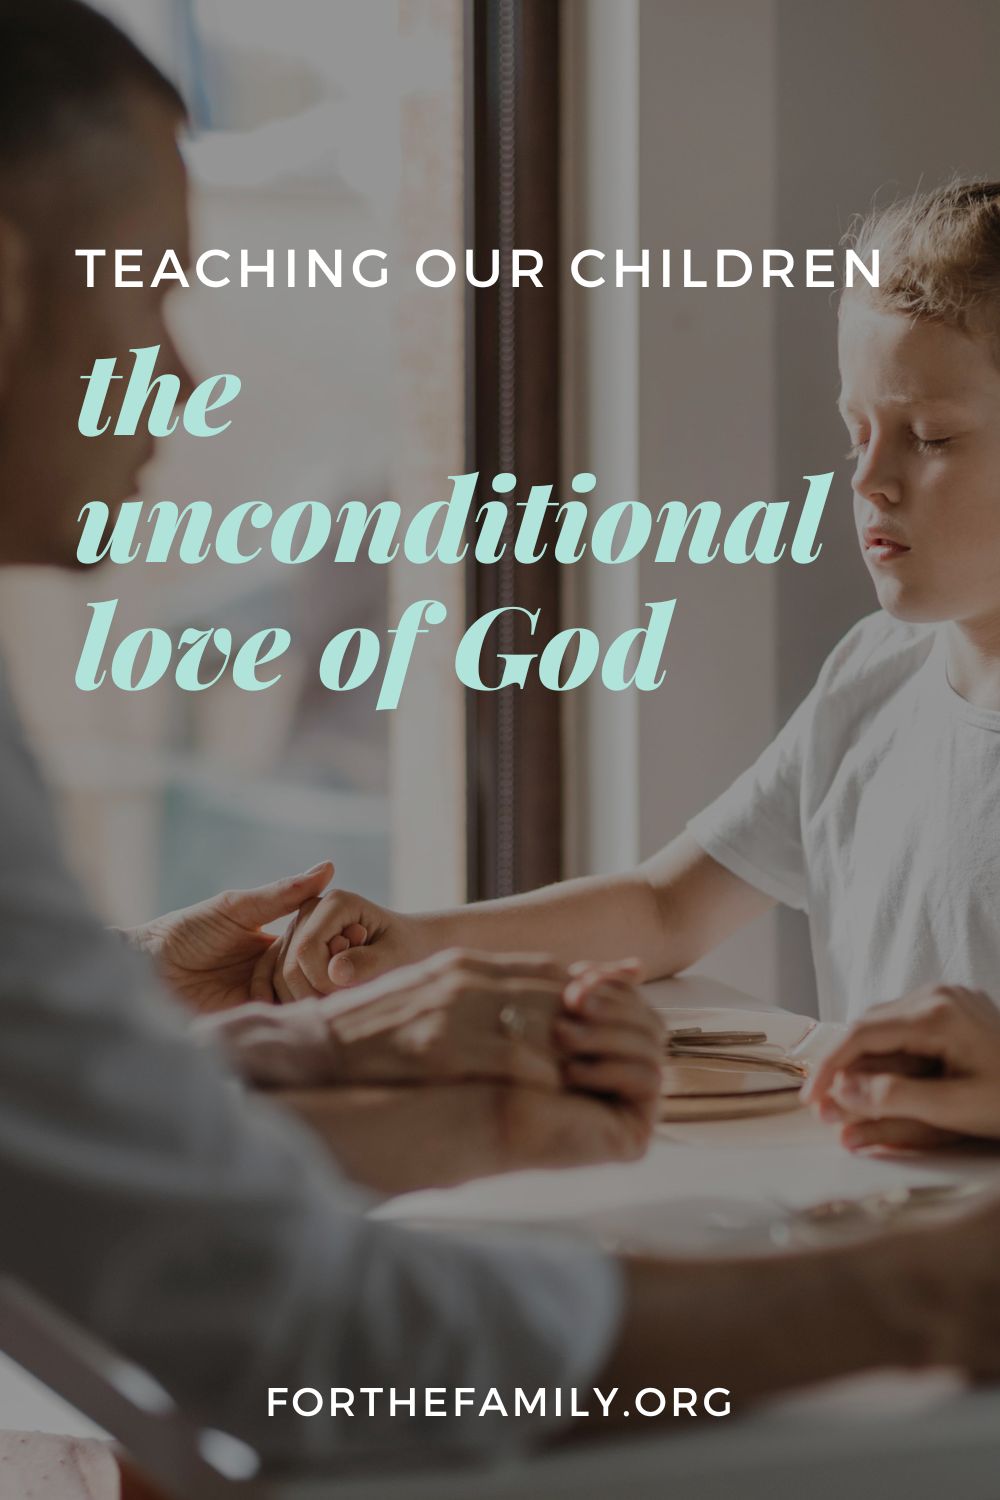 Teaching Our Children the Unconditional Love of God